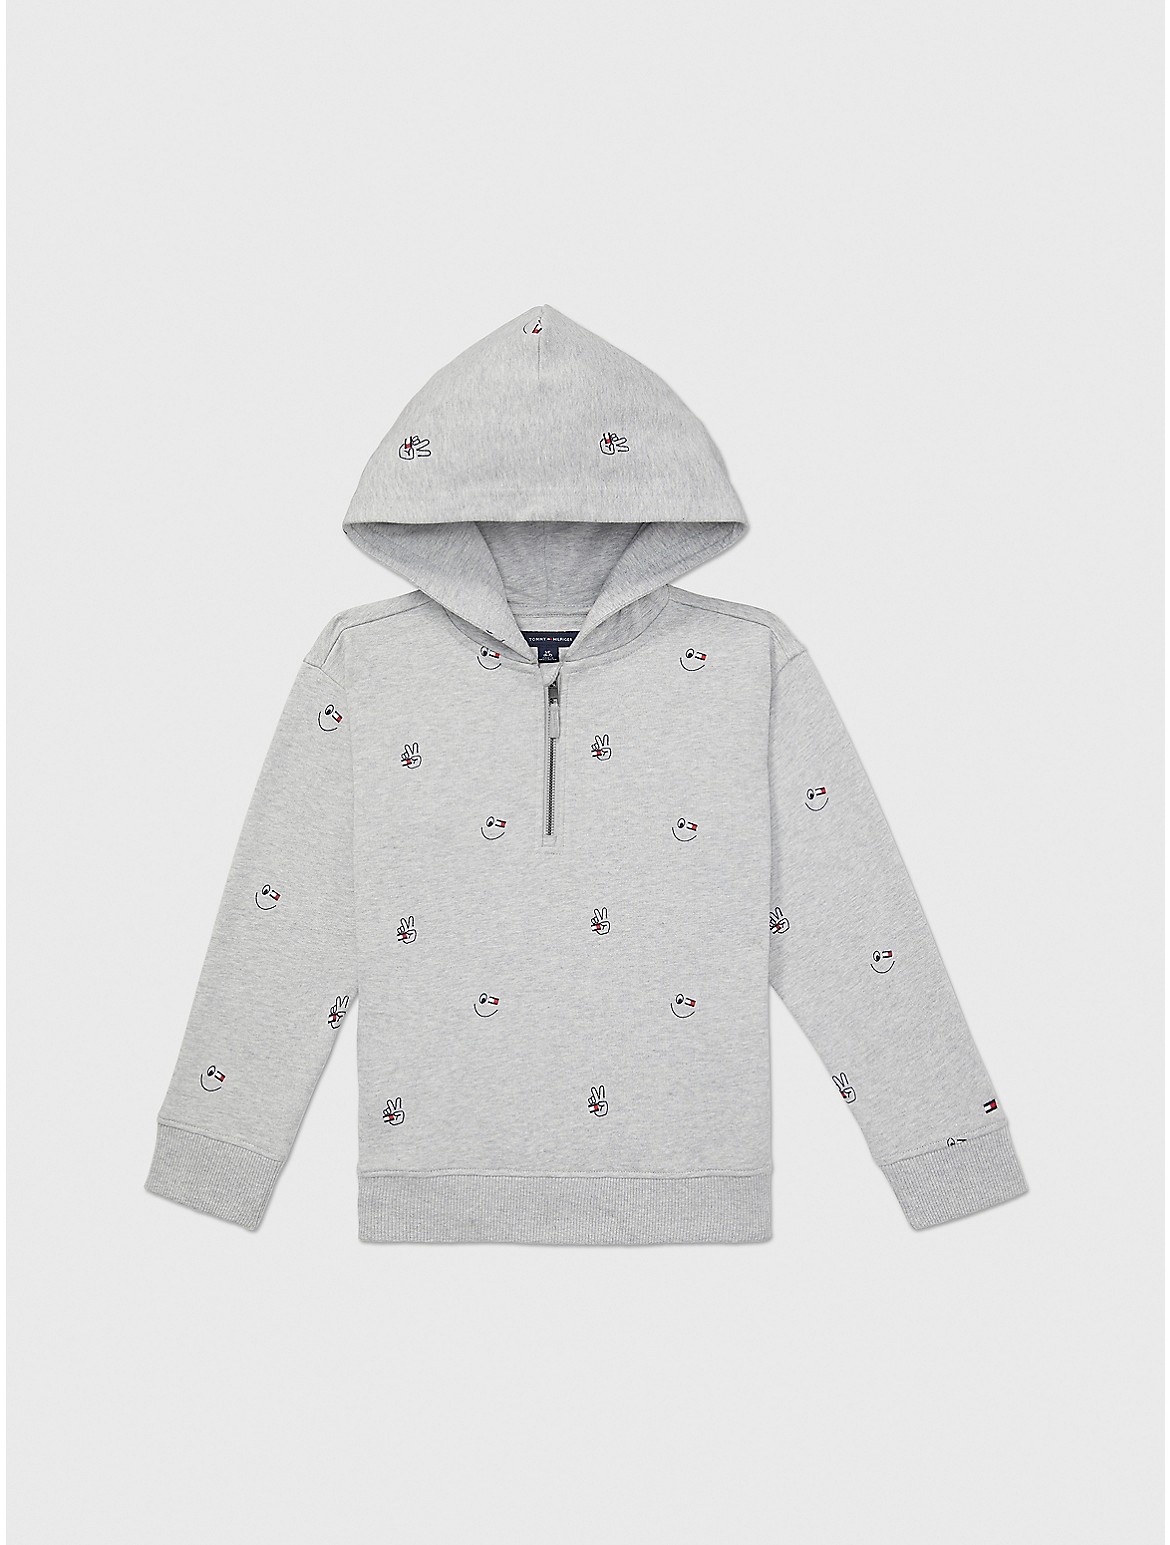 Tommy Hilfiger Boys' Kids' Peace and Smiles Critter Hoodie